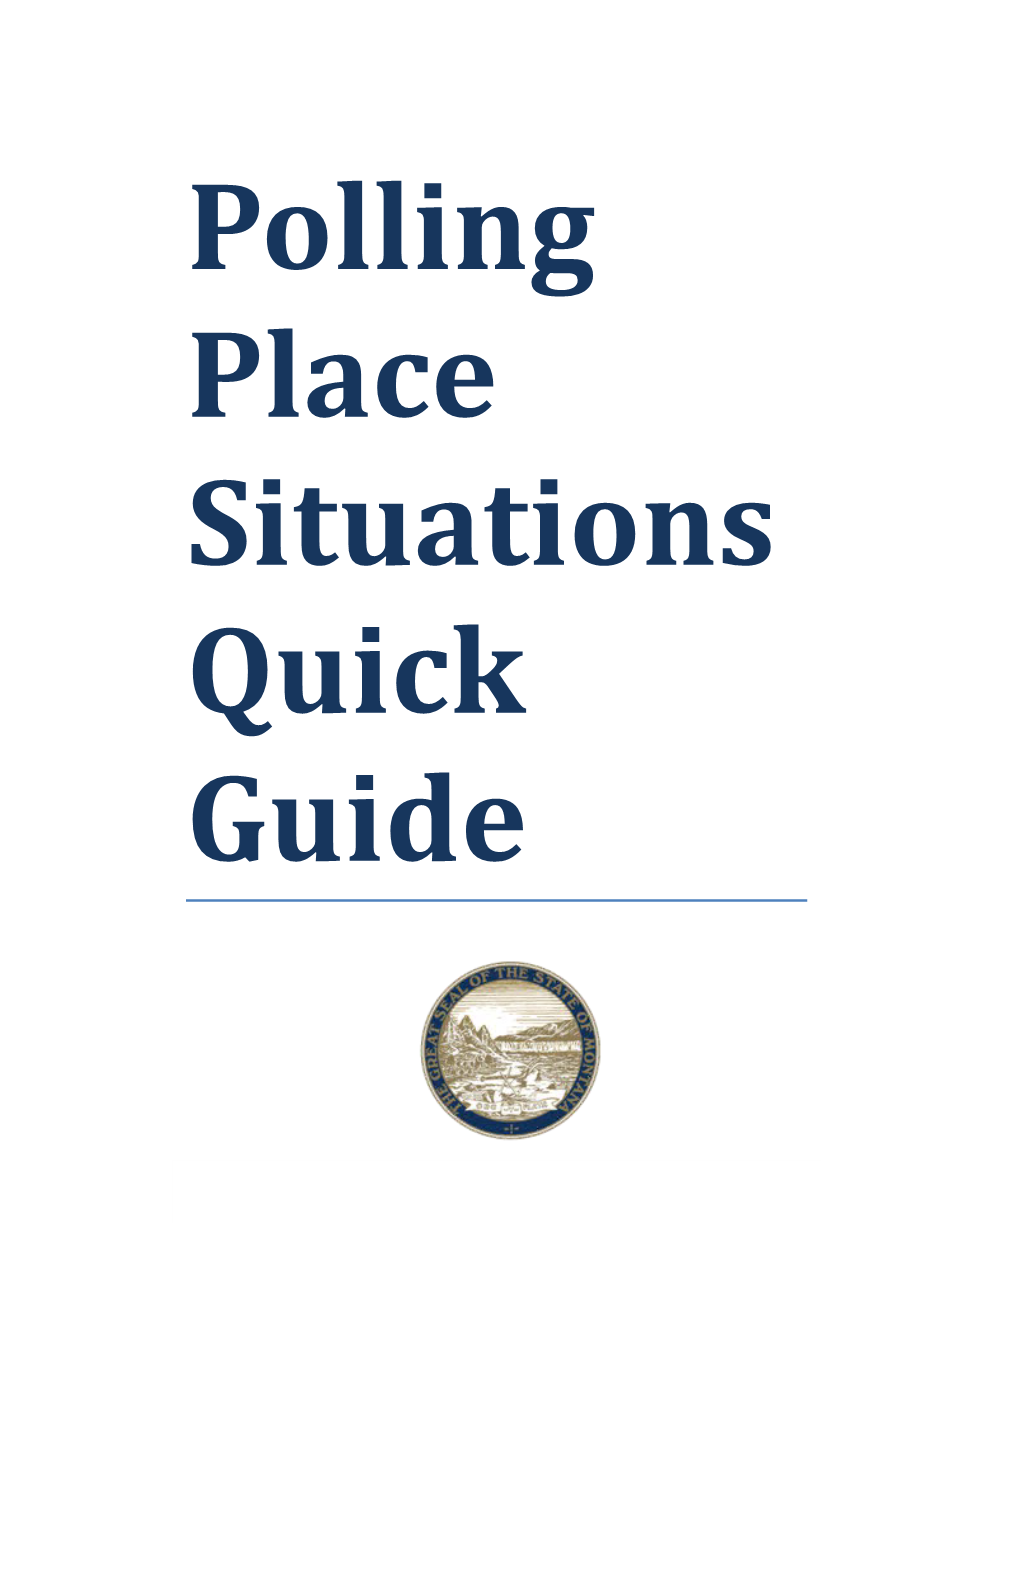 Polling Place Situations Quick Guide